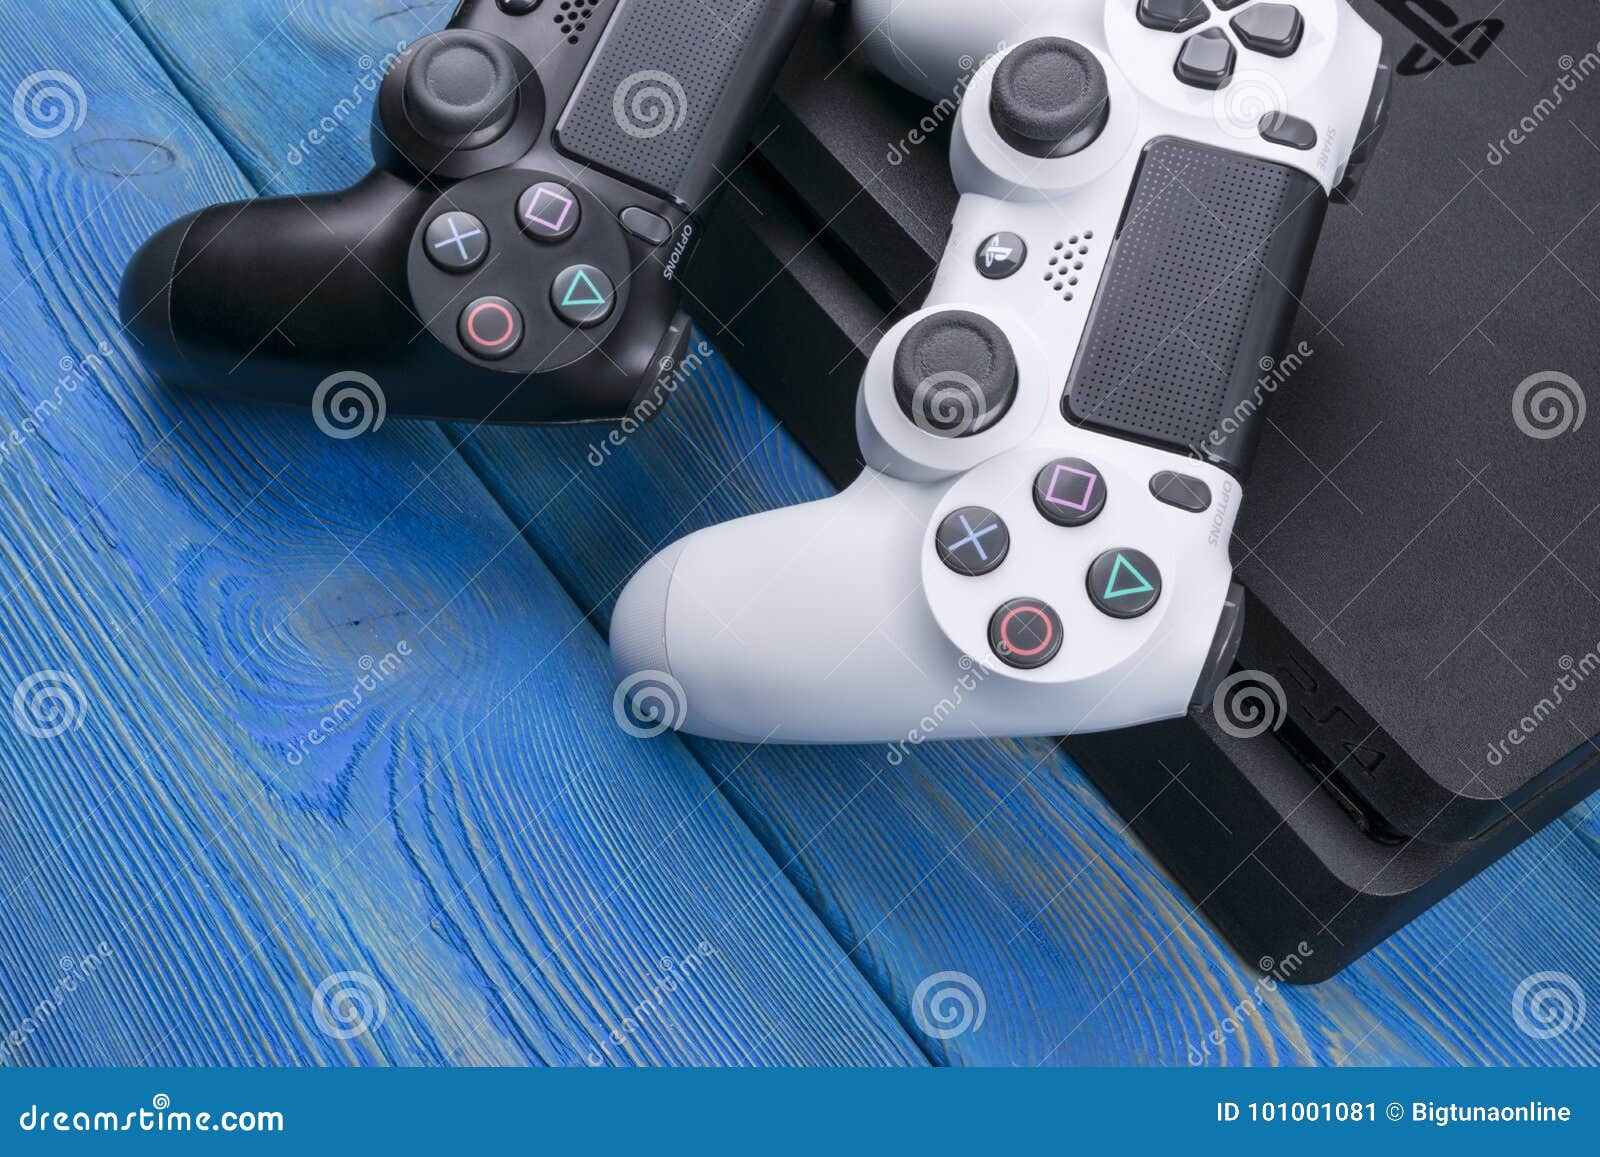 Sony PlayStation 4 Revision and Dualshock Game Controller. Game Console with a Joystick Photo - Image of keypad, entertainment: 101001081